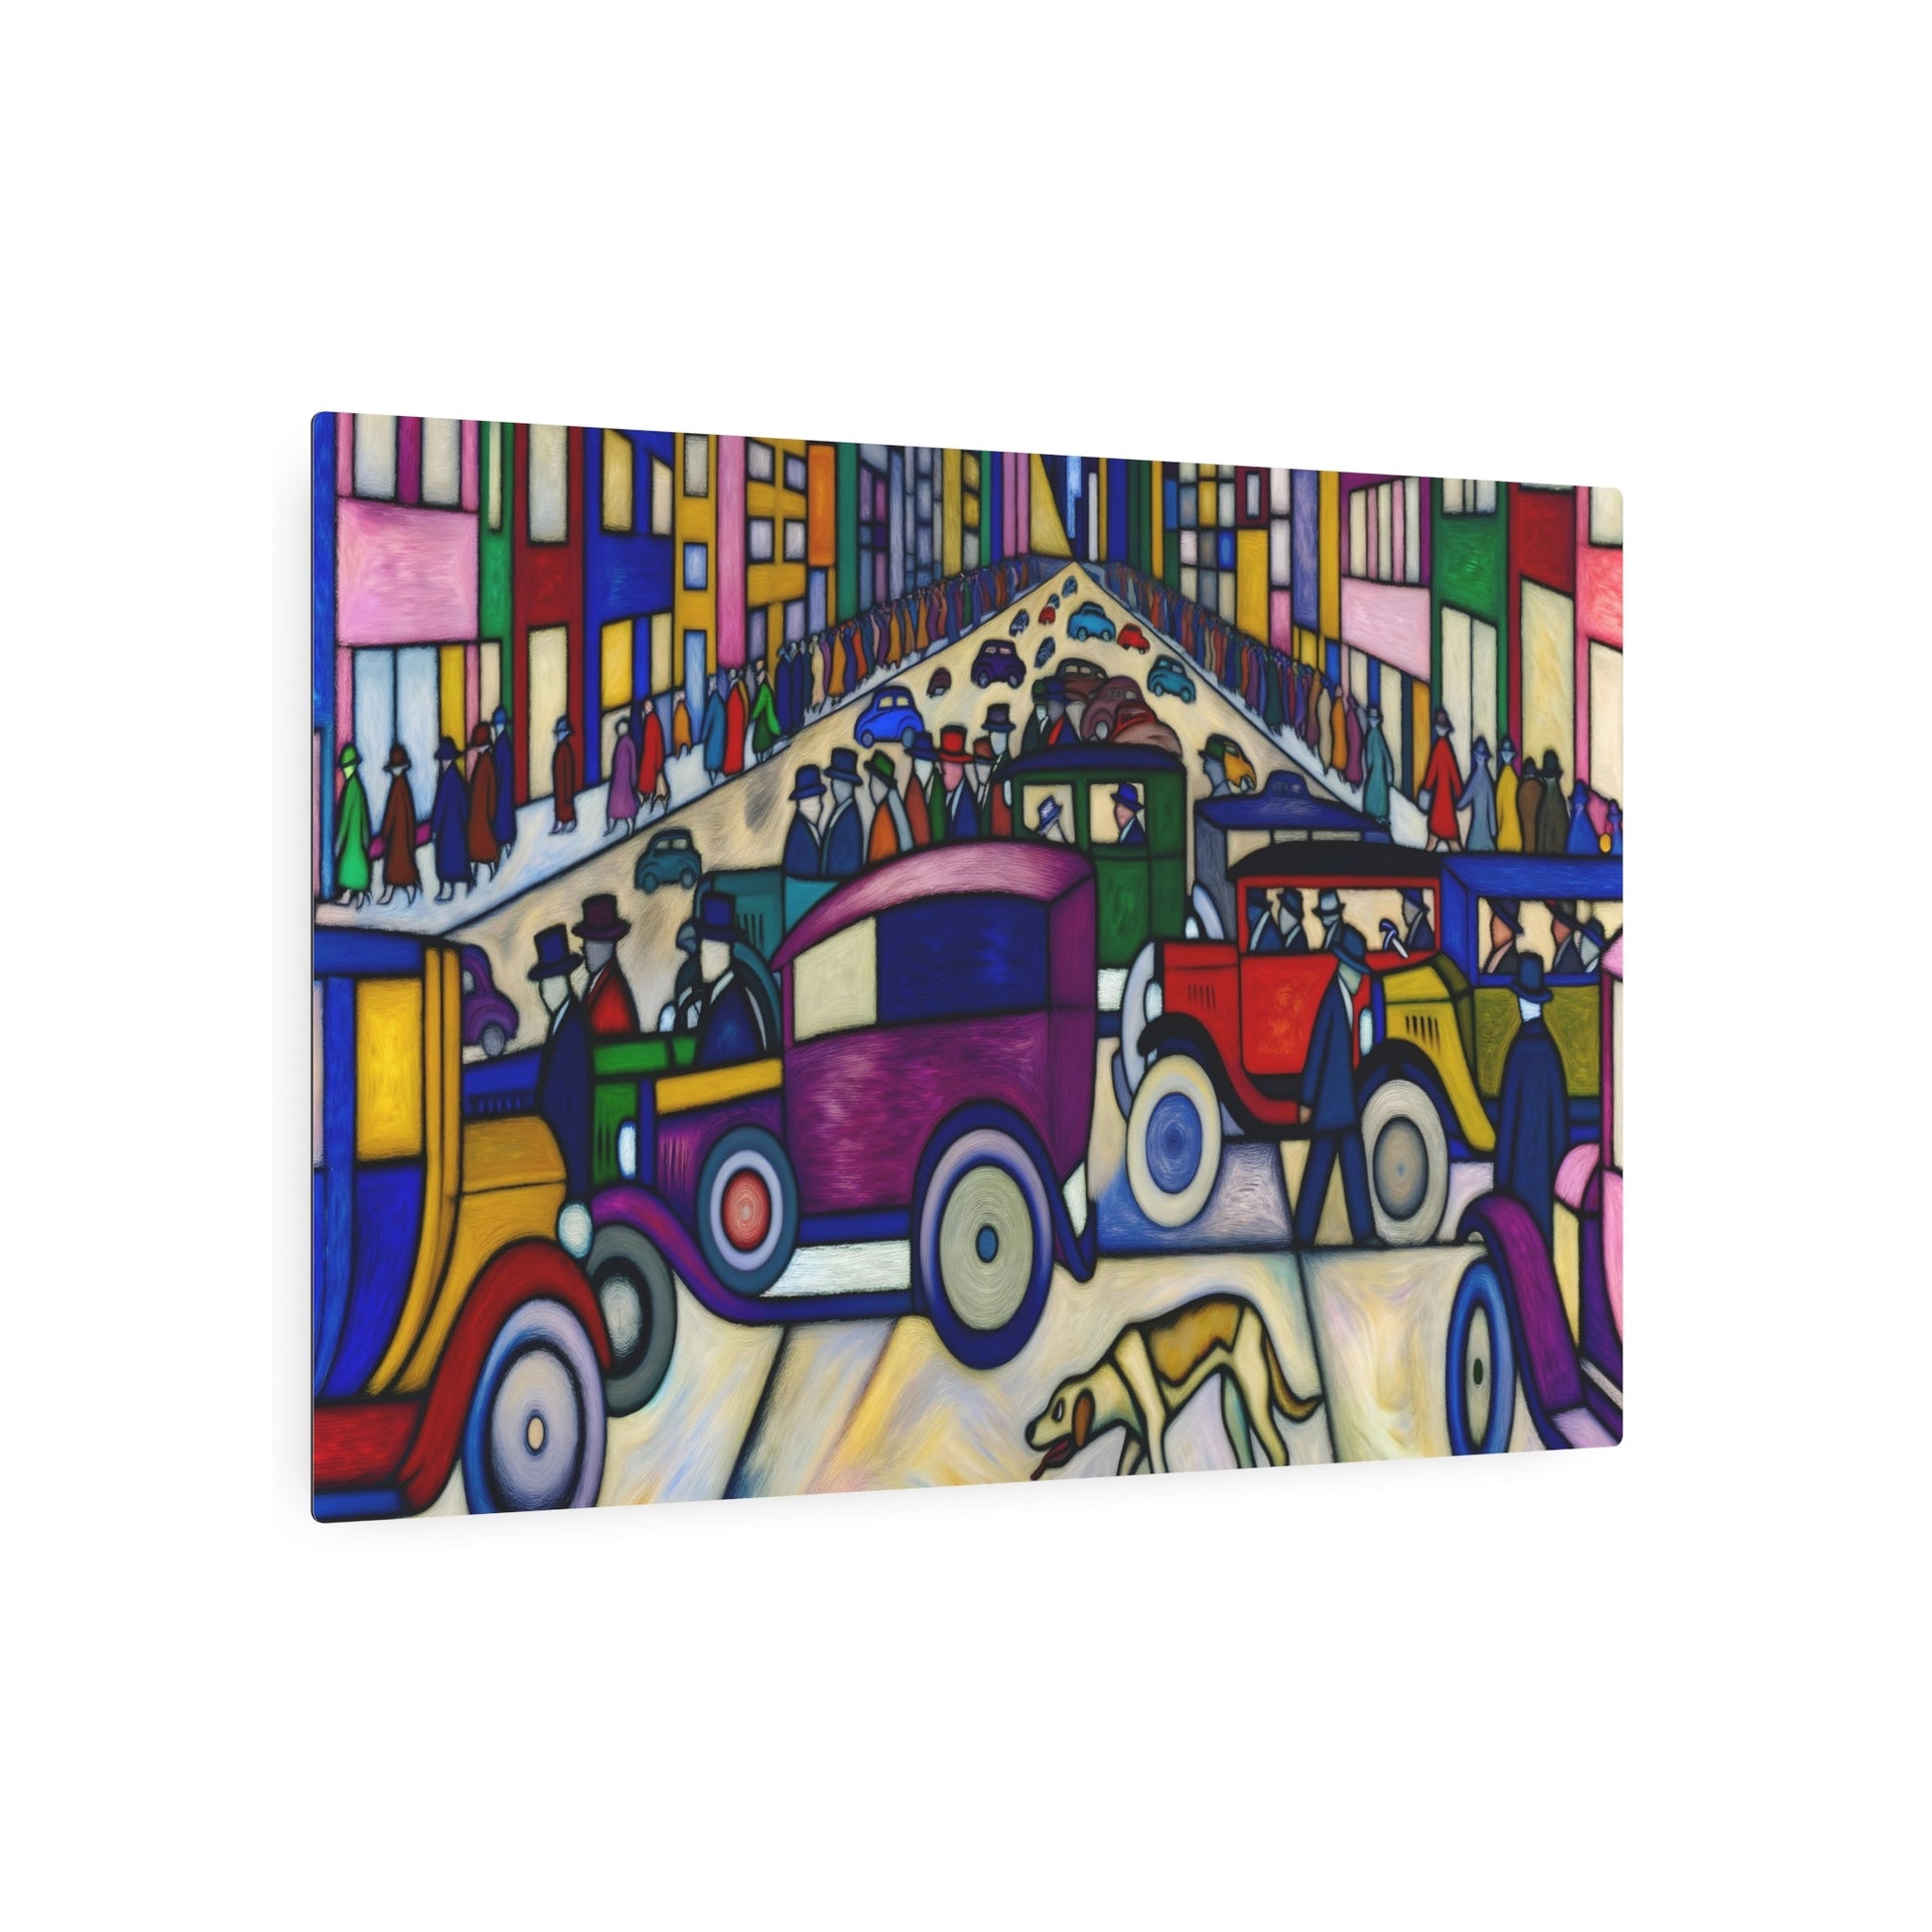 Metal Poster Art | "Vibrant Expressionist Western Art Style - NYC Scene with Dog Navigating Bustling Streets - Colorful, Distorted Visuals Challeng - Metal Poster Art 36″ x 24″ (Horizontal) 0.12''